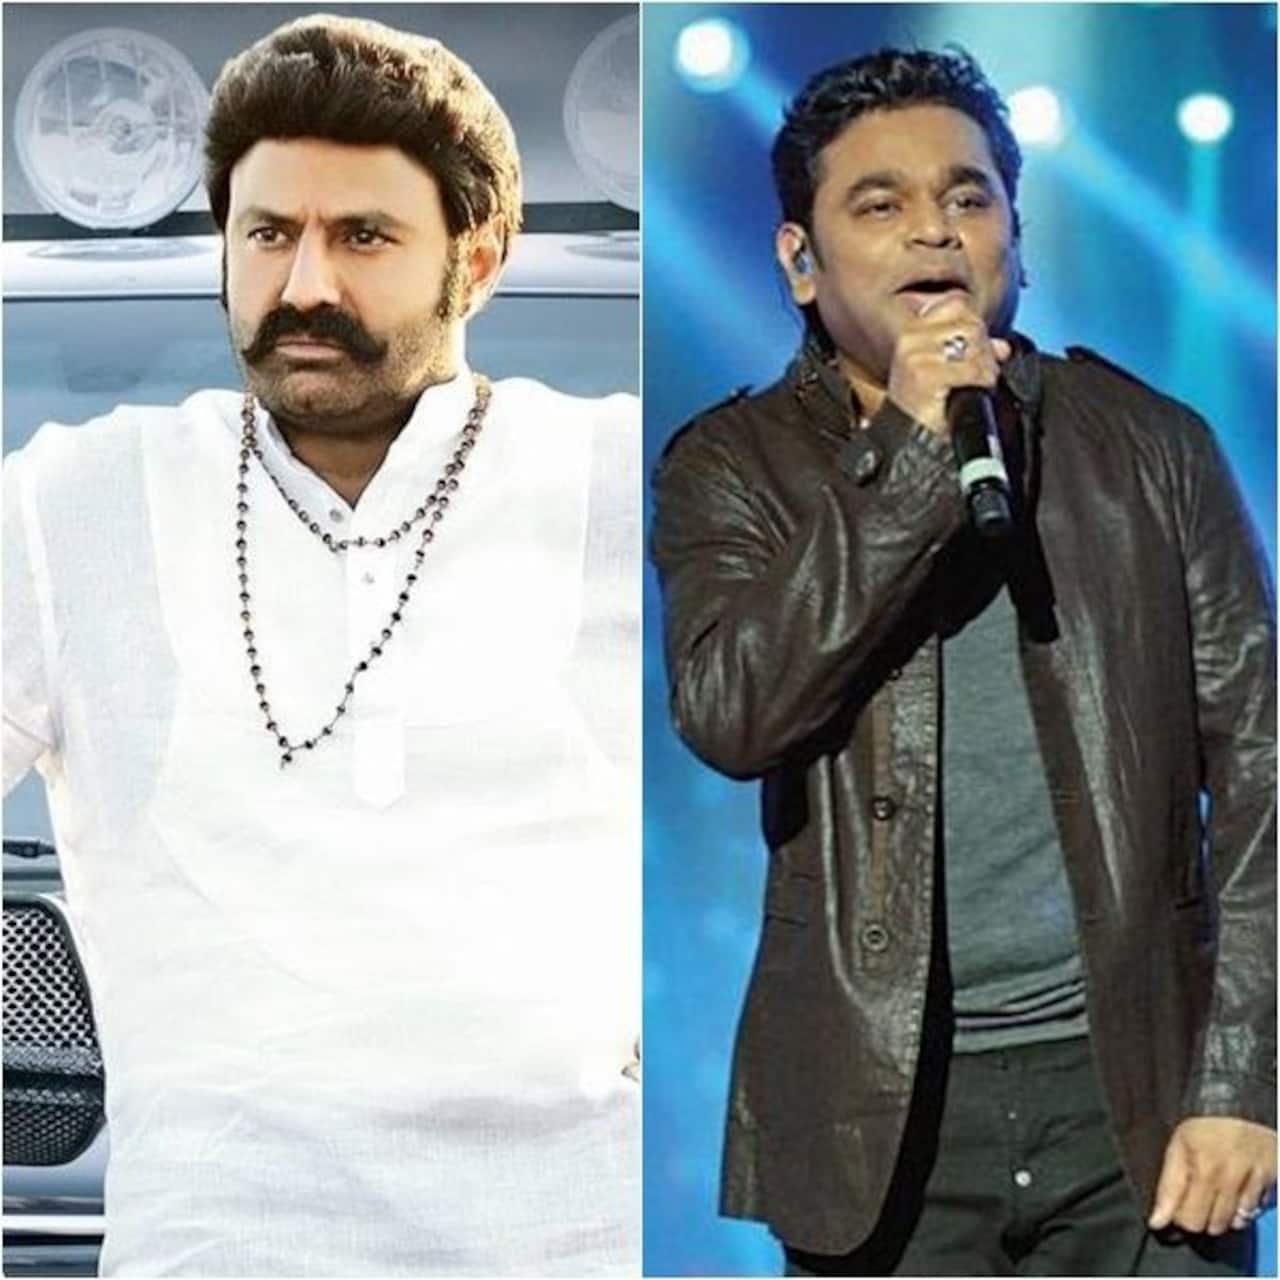 Fans trend 'Who is Nandamuri Balakrishna' after the Telugu star says he doesn't know who AR   Rahman is and claims Bharat Ratna is equal to his father NTR's toenail